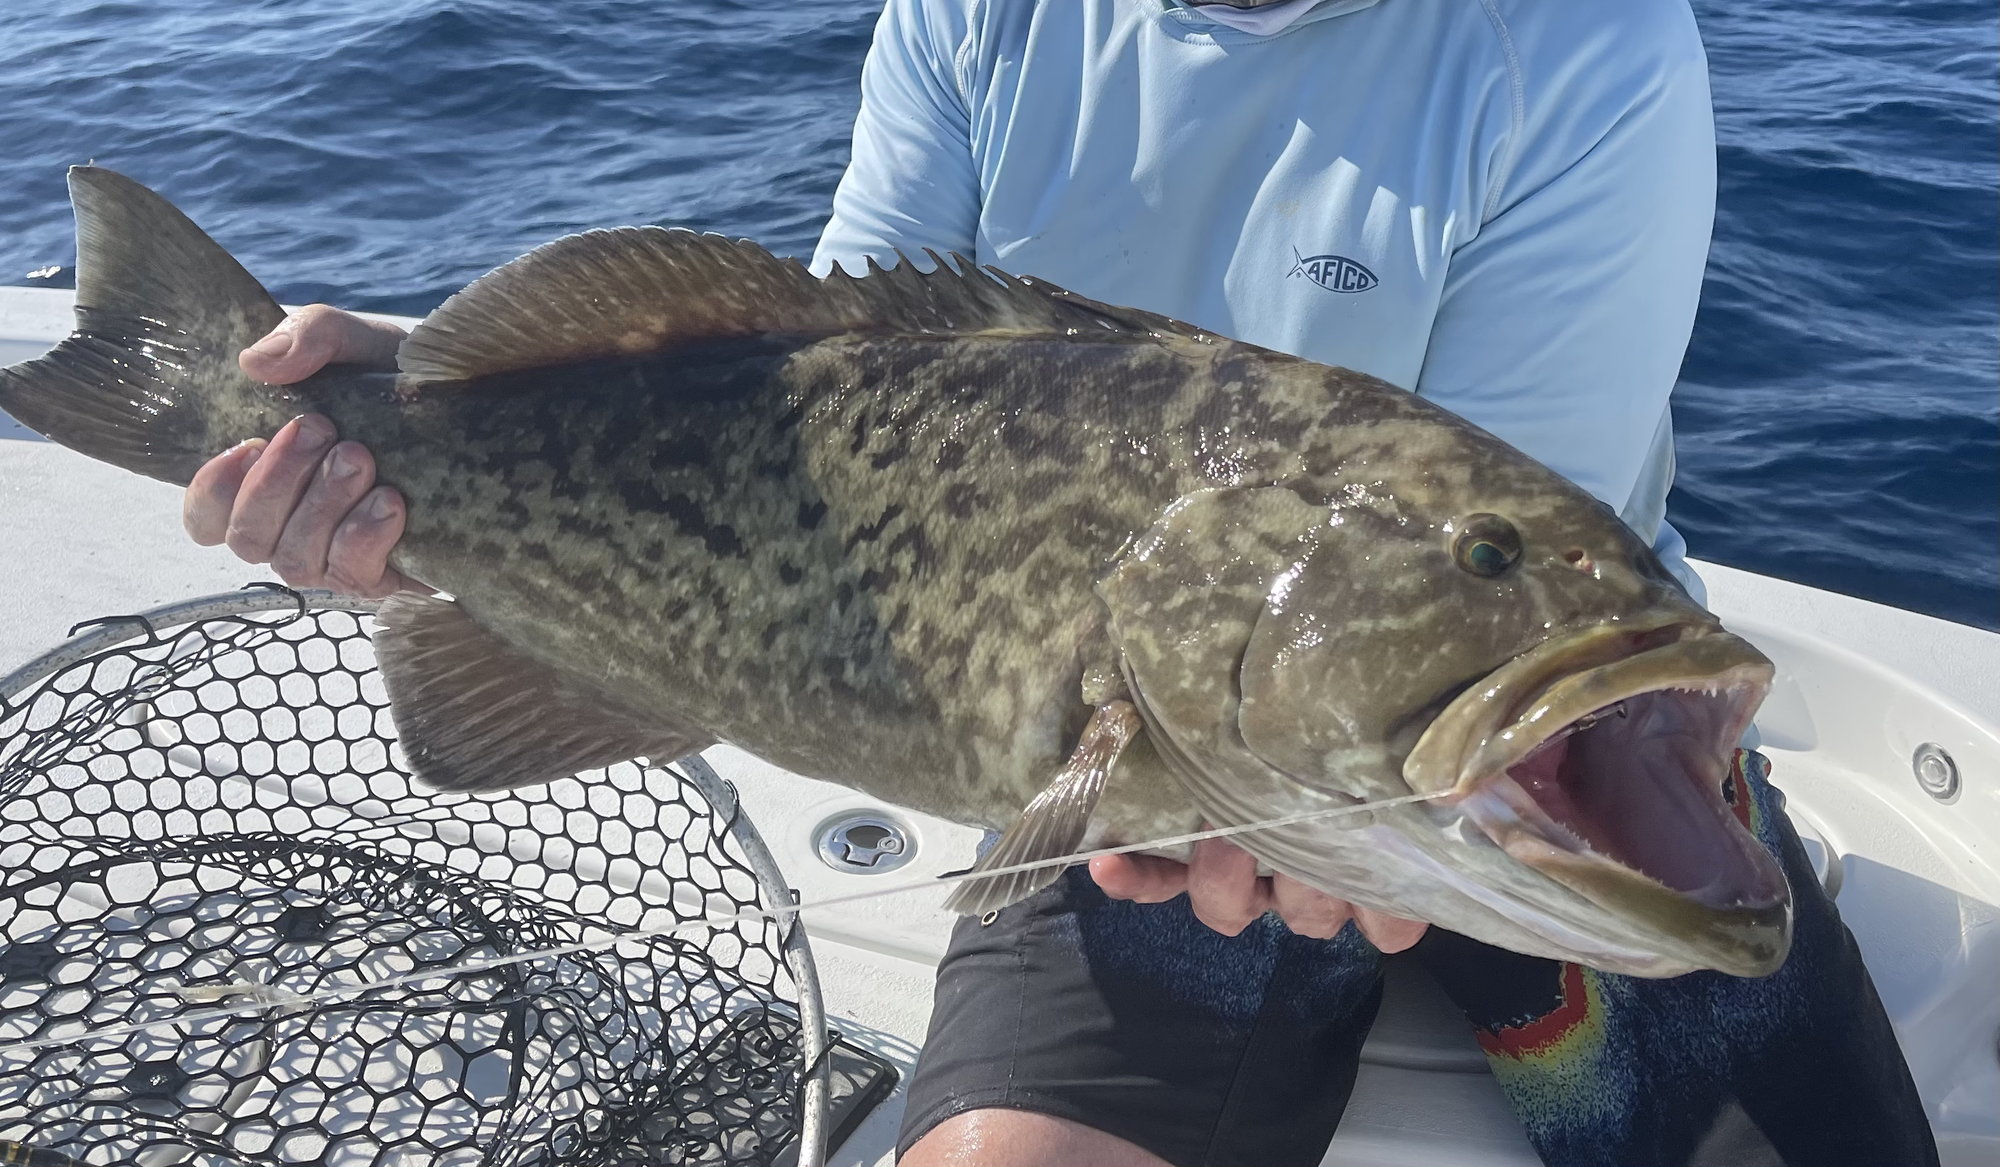 Smallest Reel Size for Snapper in 100 Feet - The Hull Truth